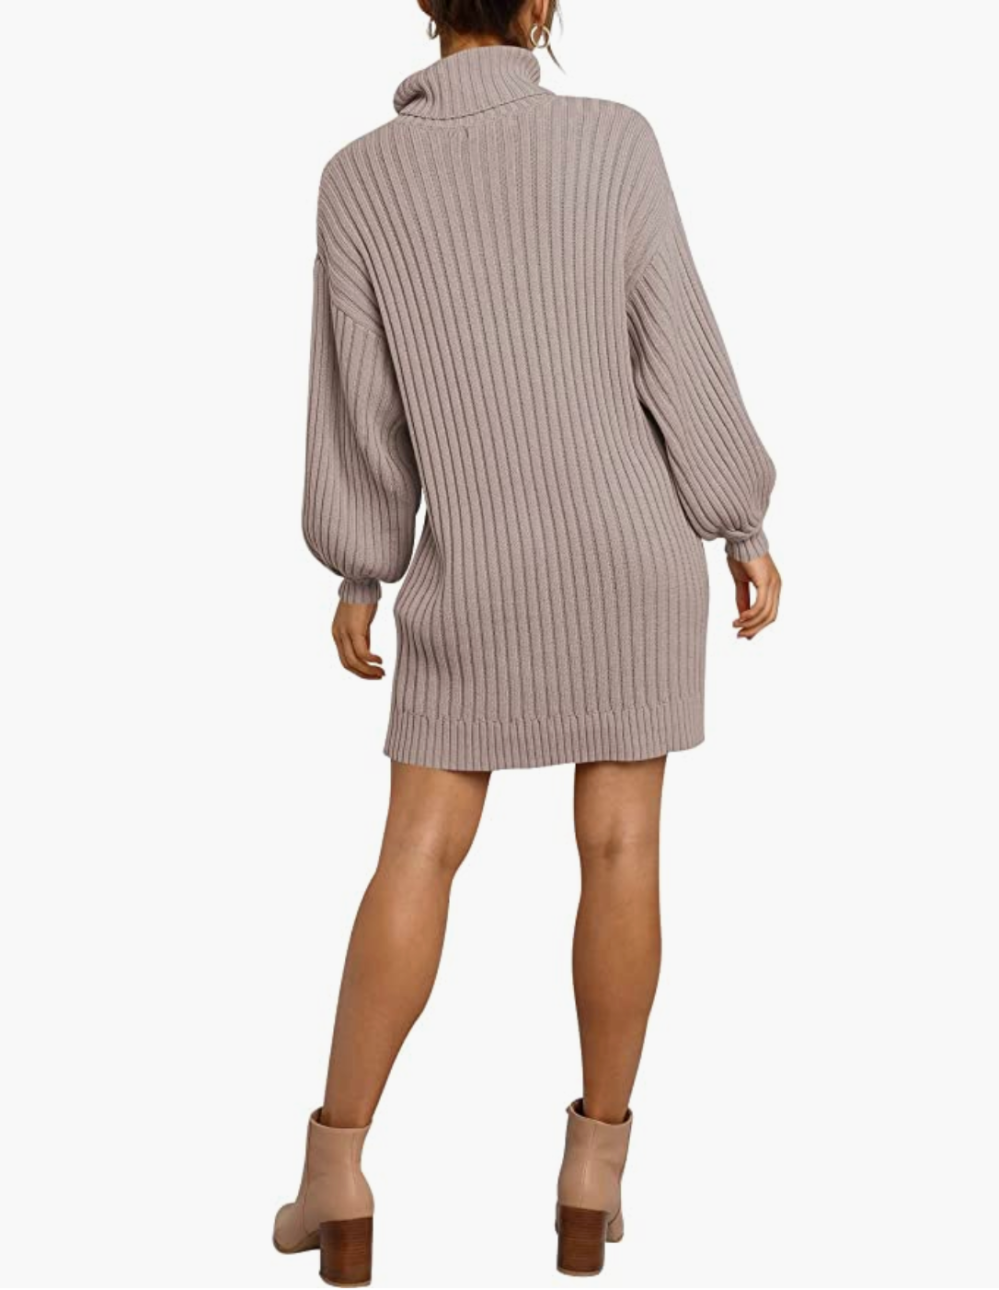 Anrabess Bestselling Sweater Dress Is on Sale for 25% Off or More | Us ...